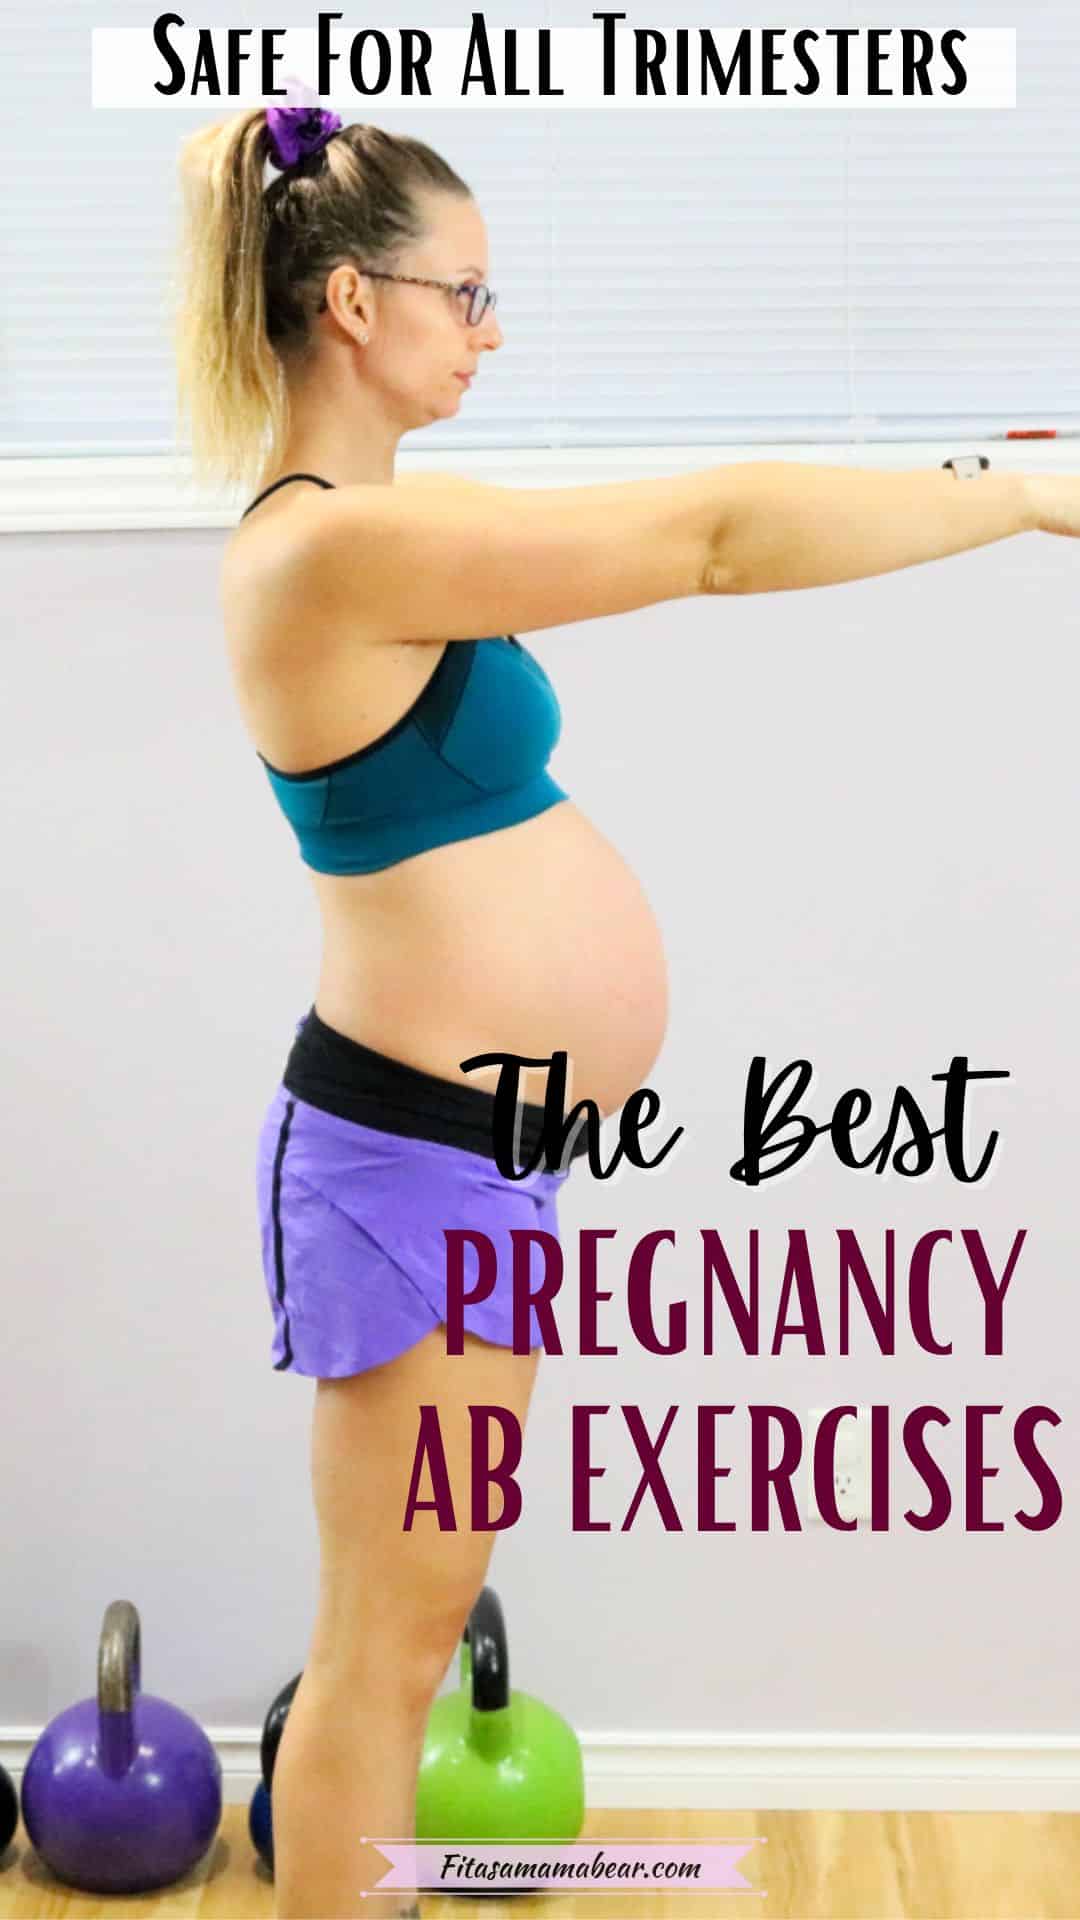 Top 8 Safe Ab Exercises In Pregnancy (for every trimester)